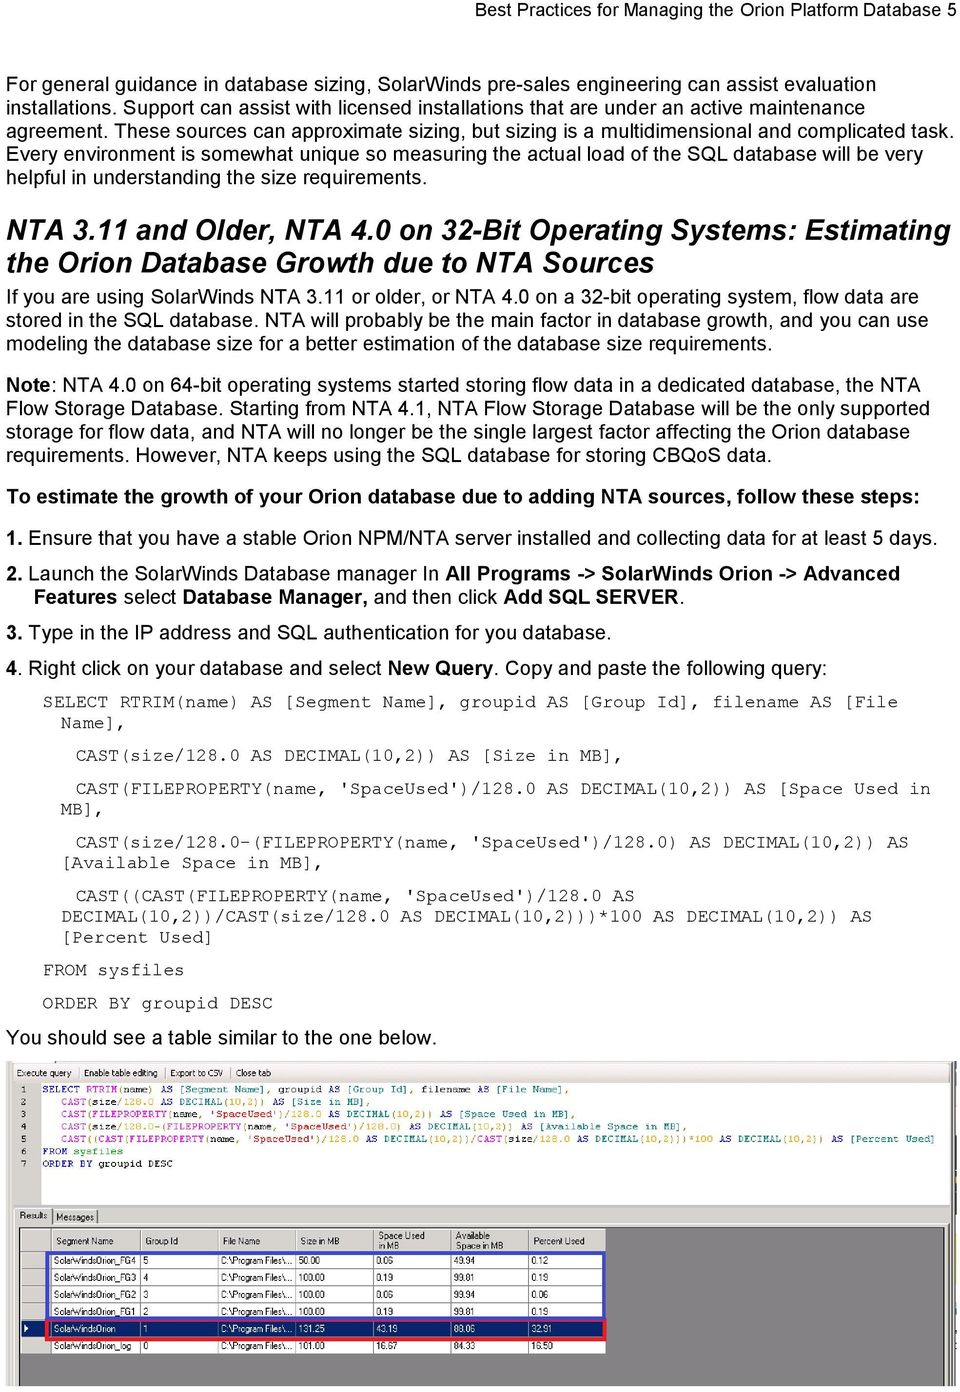 Every environment is somewhat unique so measuring the actual load of the SQL database will be very helpful in understanding the size requirements. NTA 3.11 and Older, NTA 4.